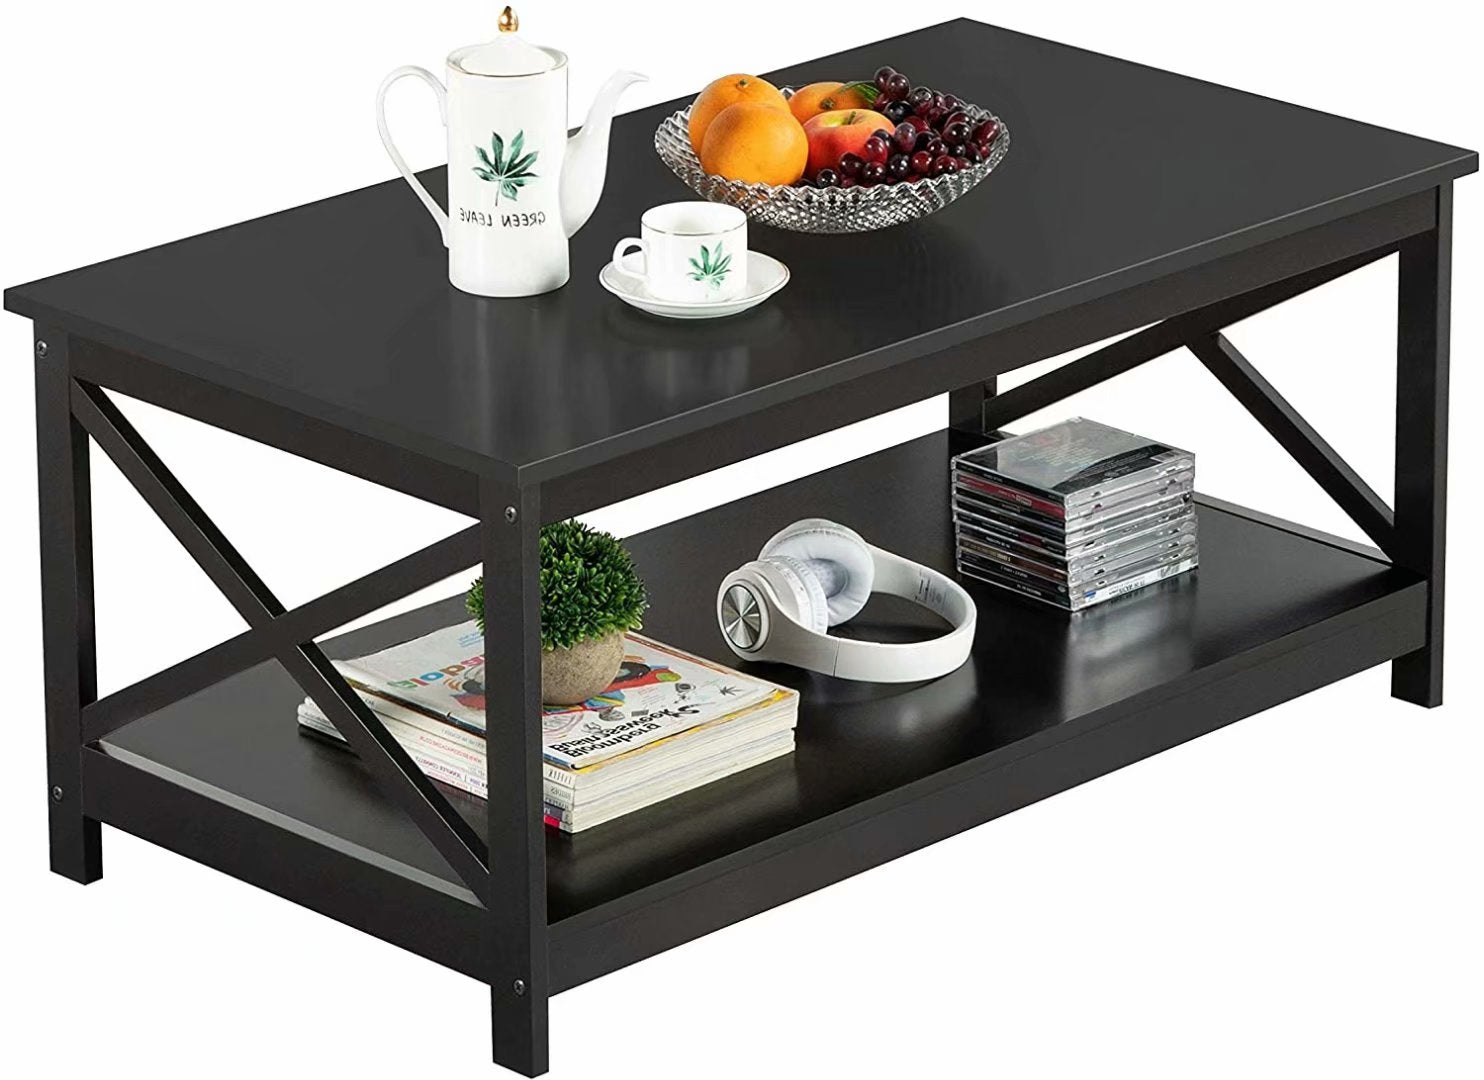 Wood 2-Tier Black Coffee Table with Storage Shelf for Living Room, X Design Accent Cocktail Table, Easy Assembly Home Furniture